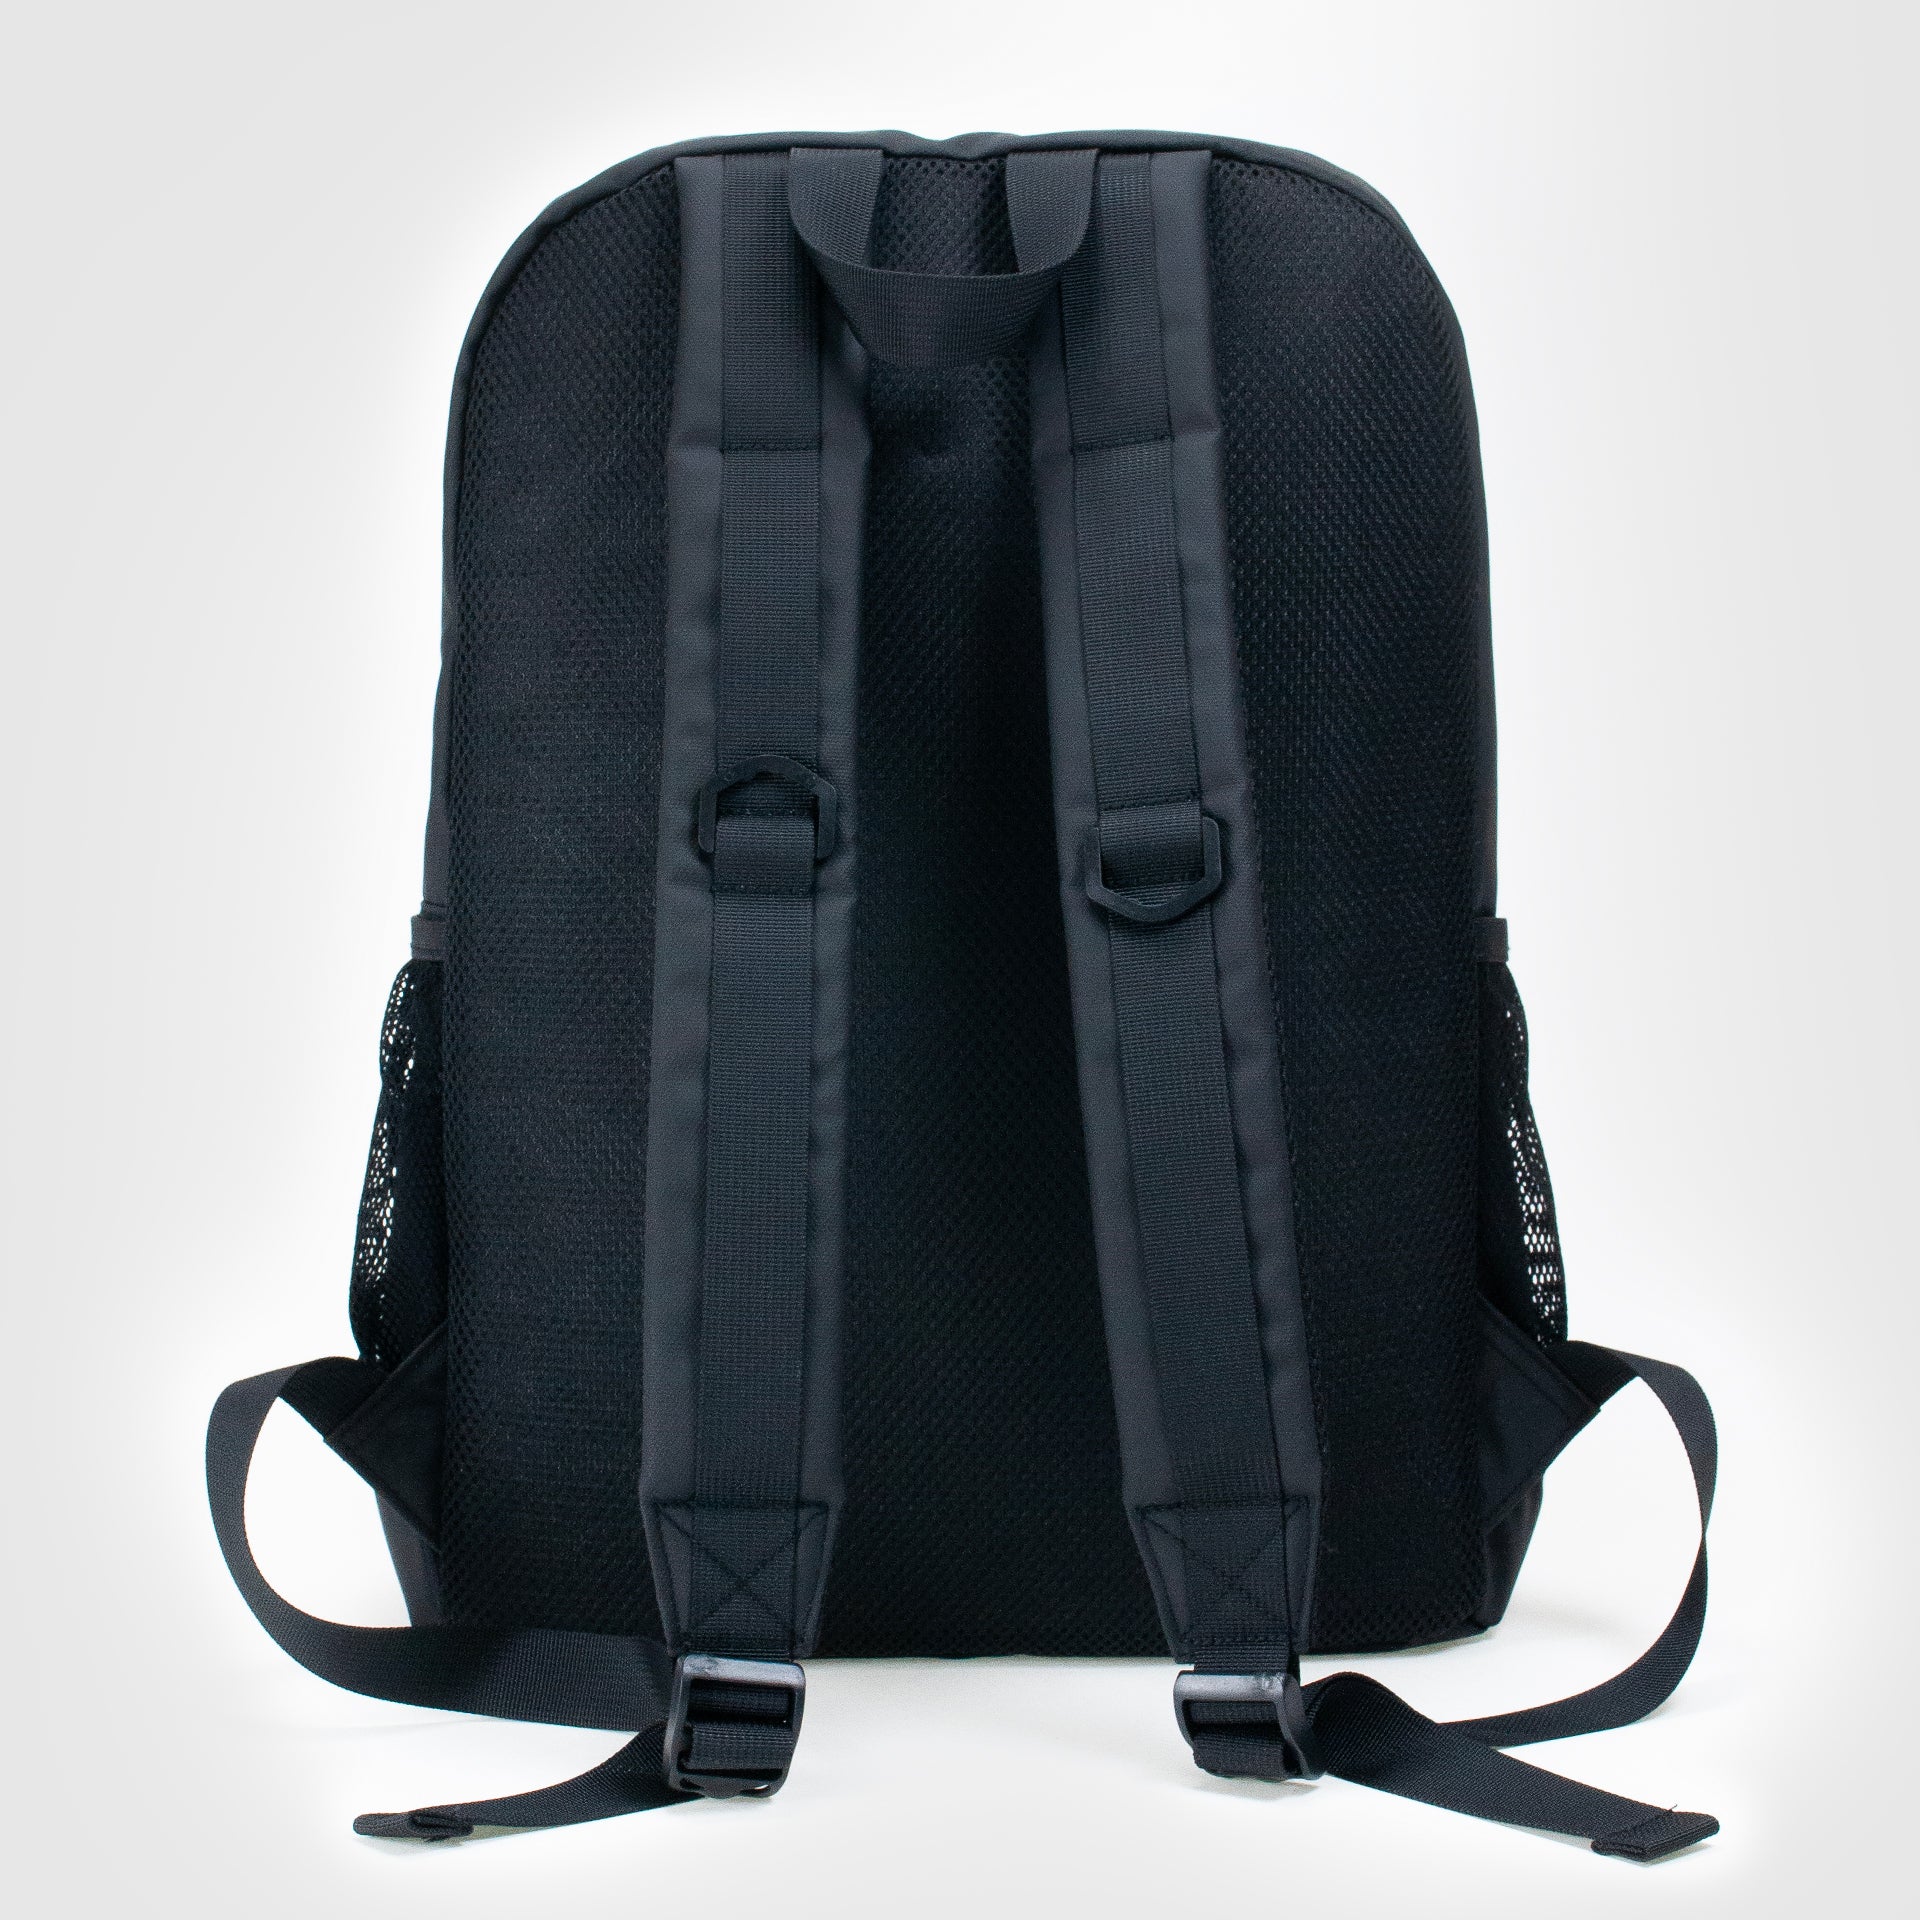 Spitfire Classic '87 Backpack - Black/ Red - Prime Delux Store